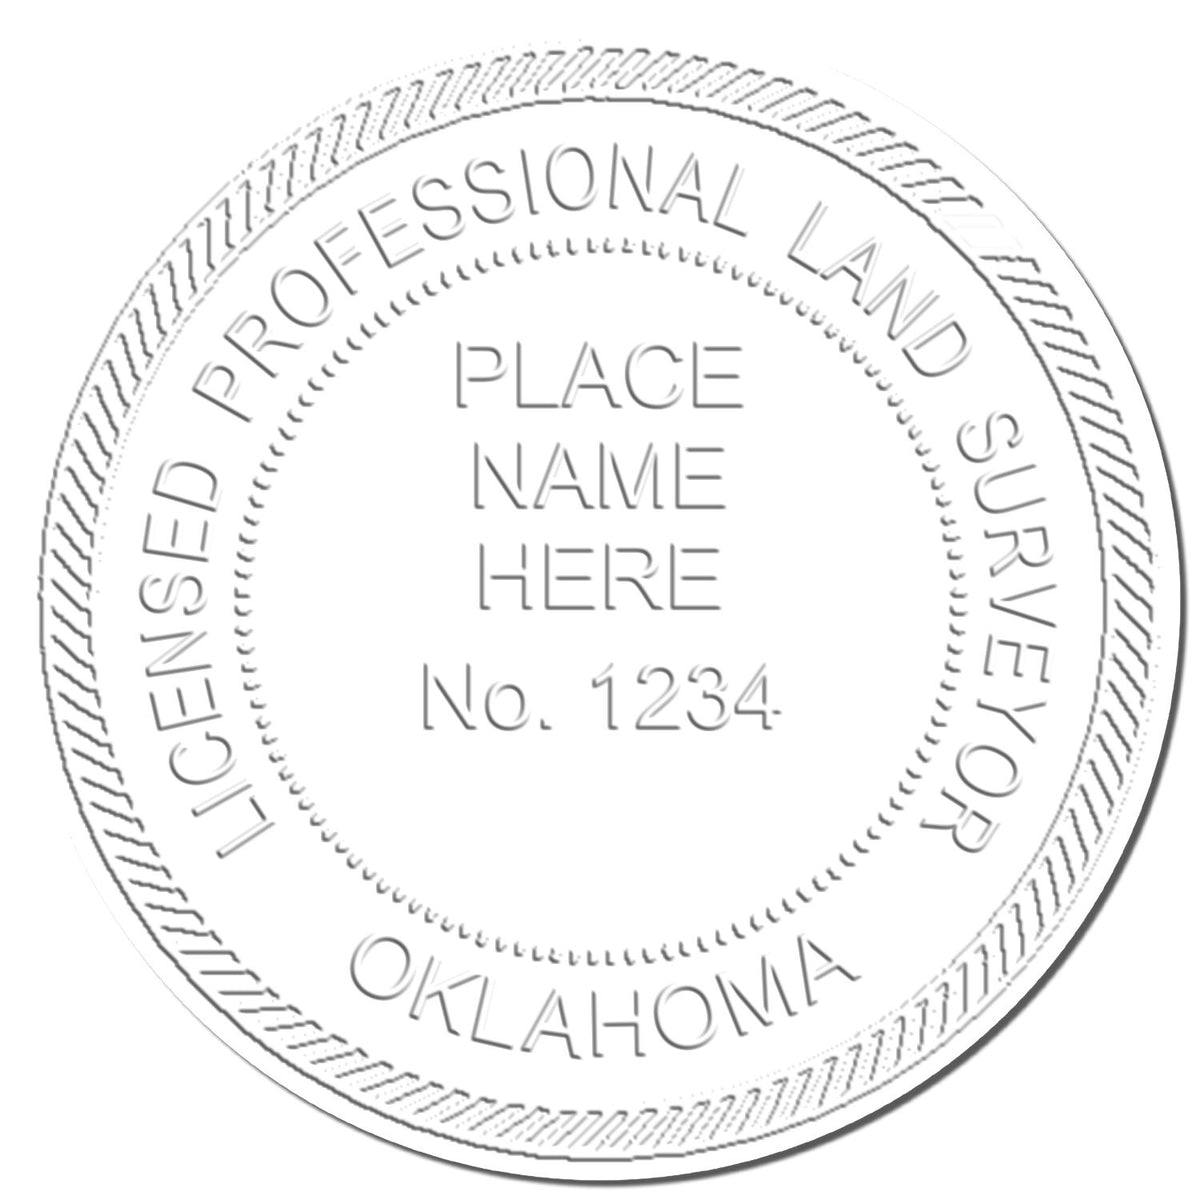 This paper is stamped with a sample imprint of the Hybrid Oklahoma Land Surveyor Seal, signifying its quality and reliability.